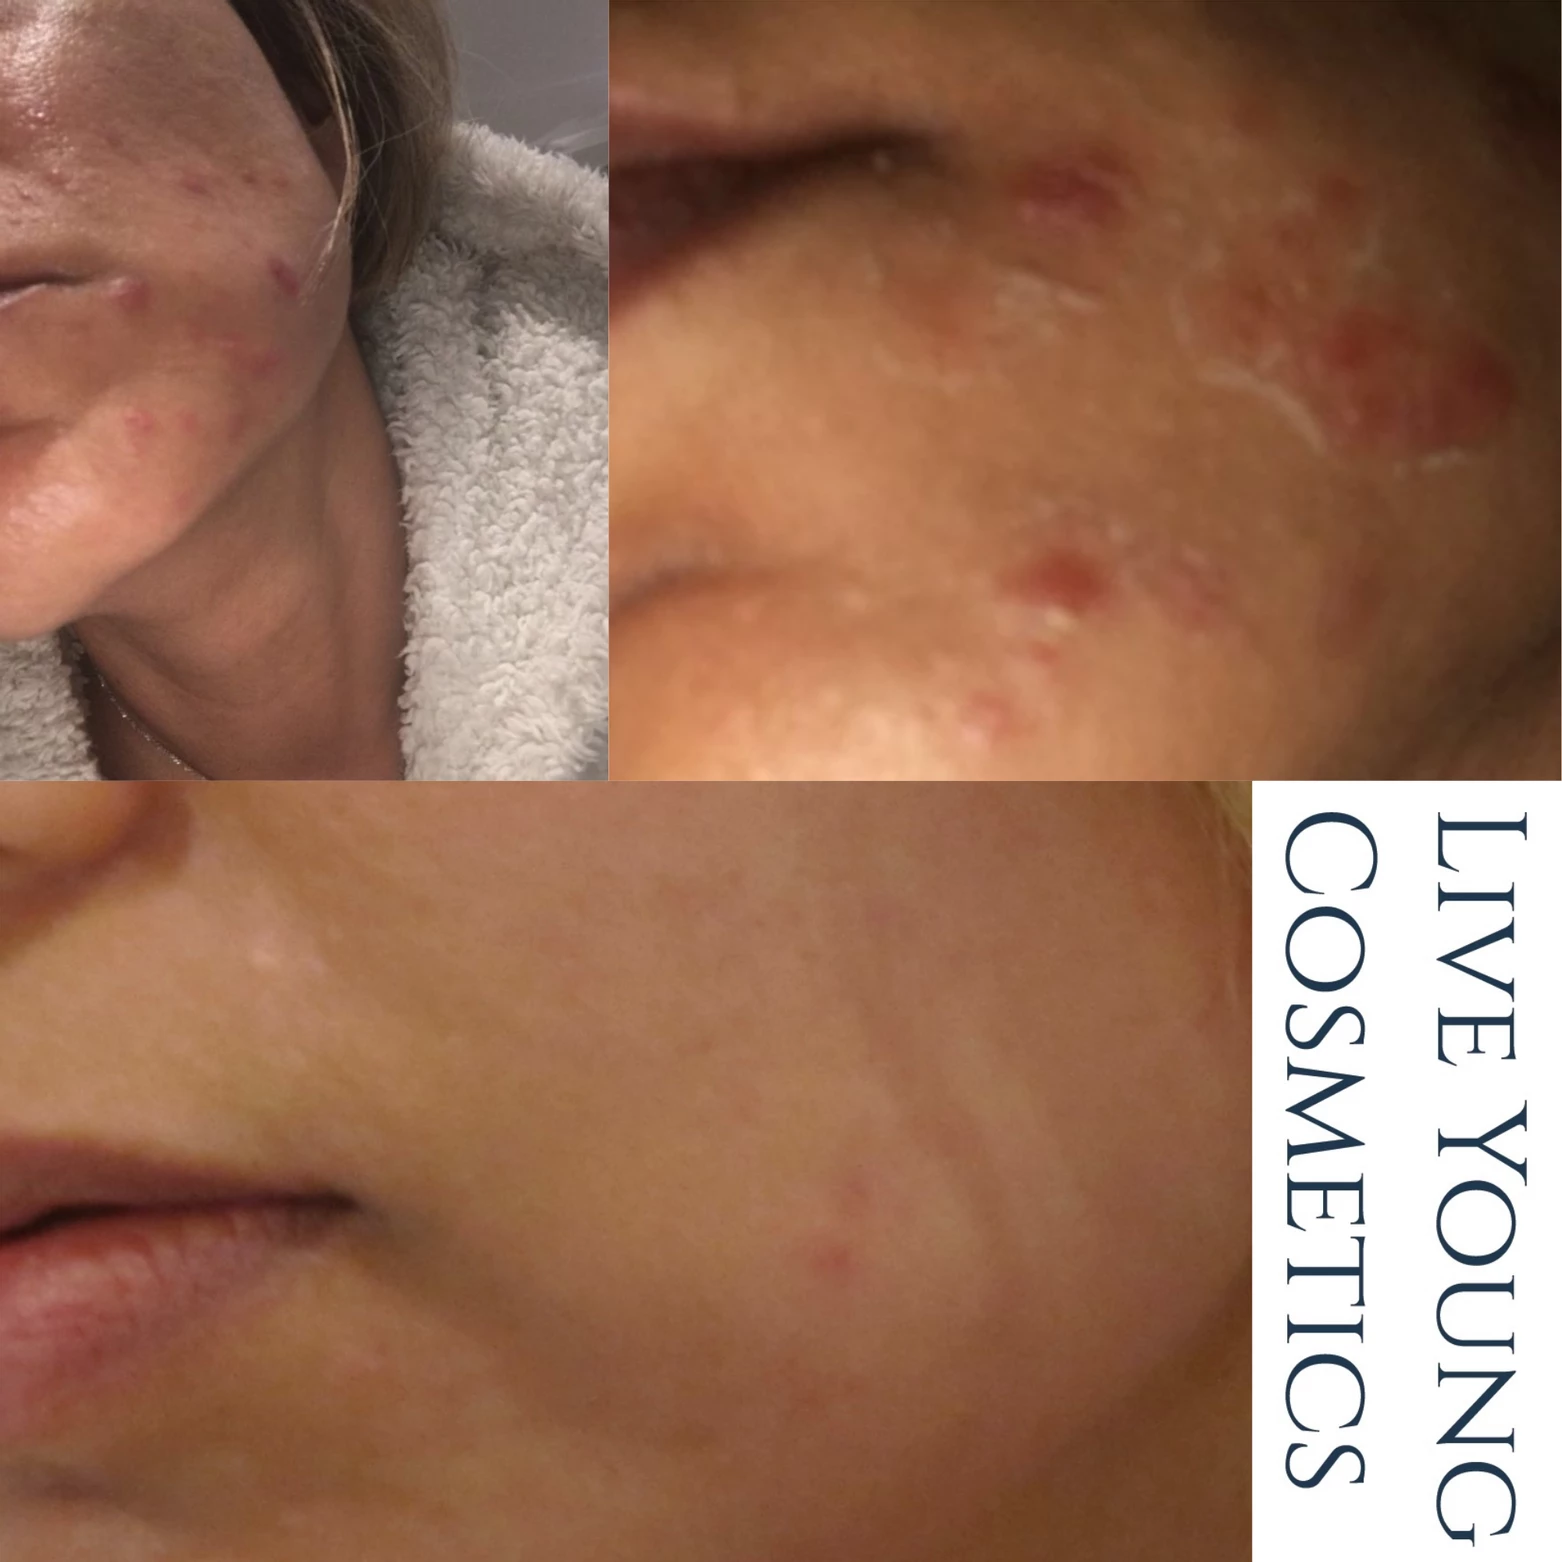 Acne treatment with microneedling, ZO skin care and topical Tretinoin Available at Dr Azoo Clinic, Ealing, London